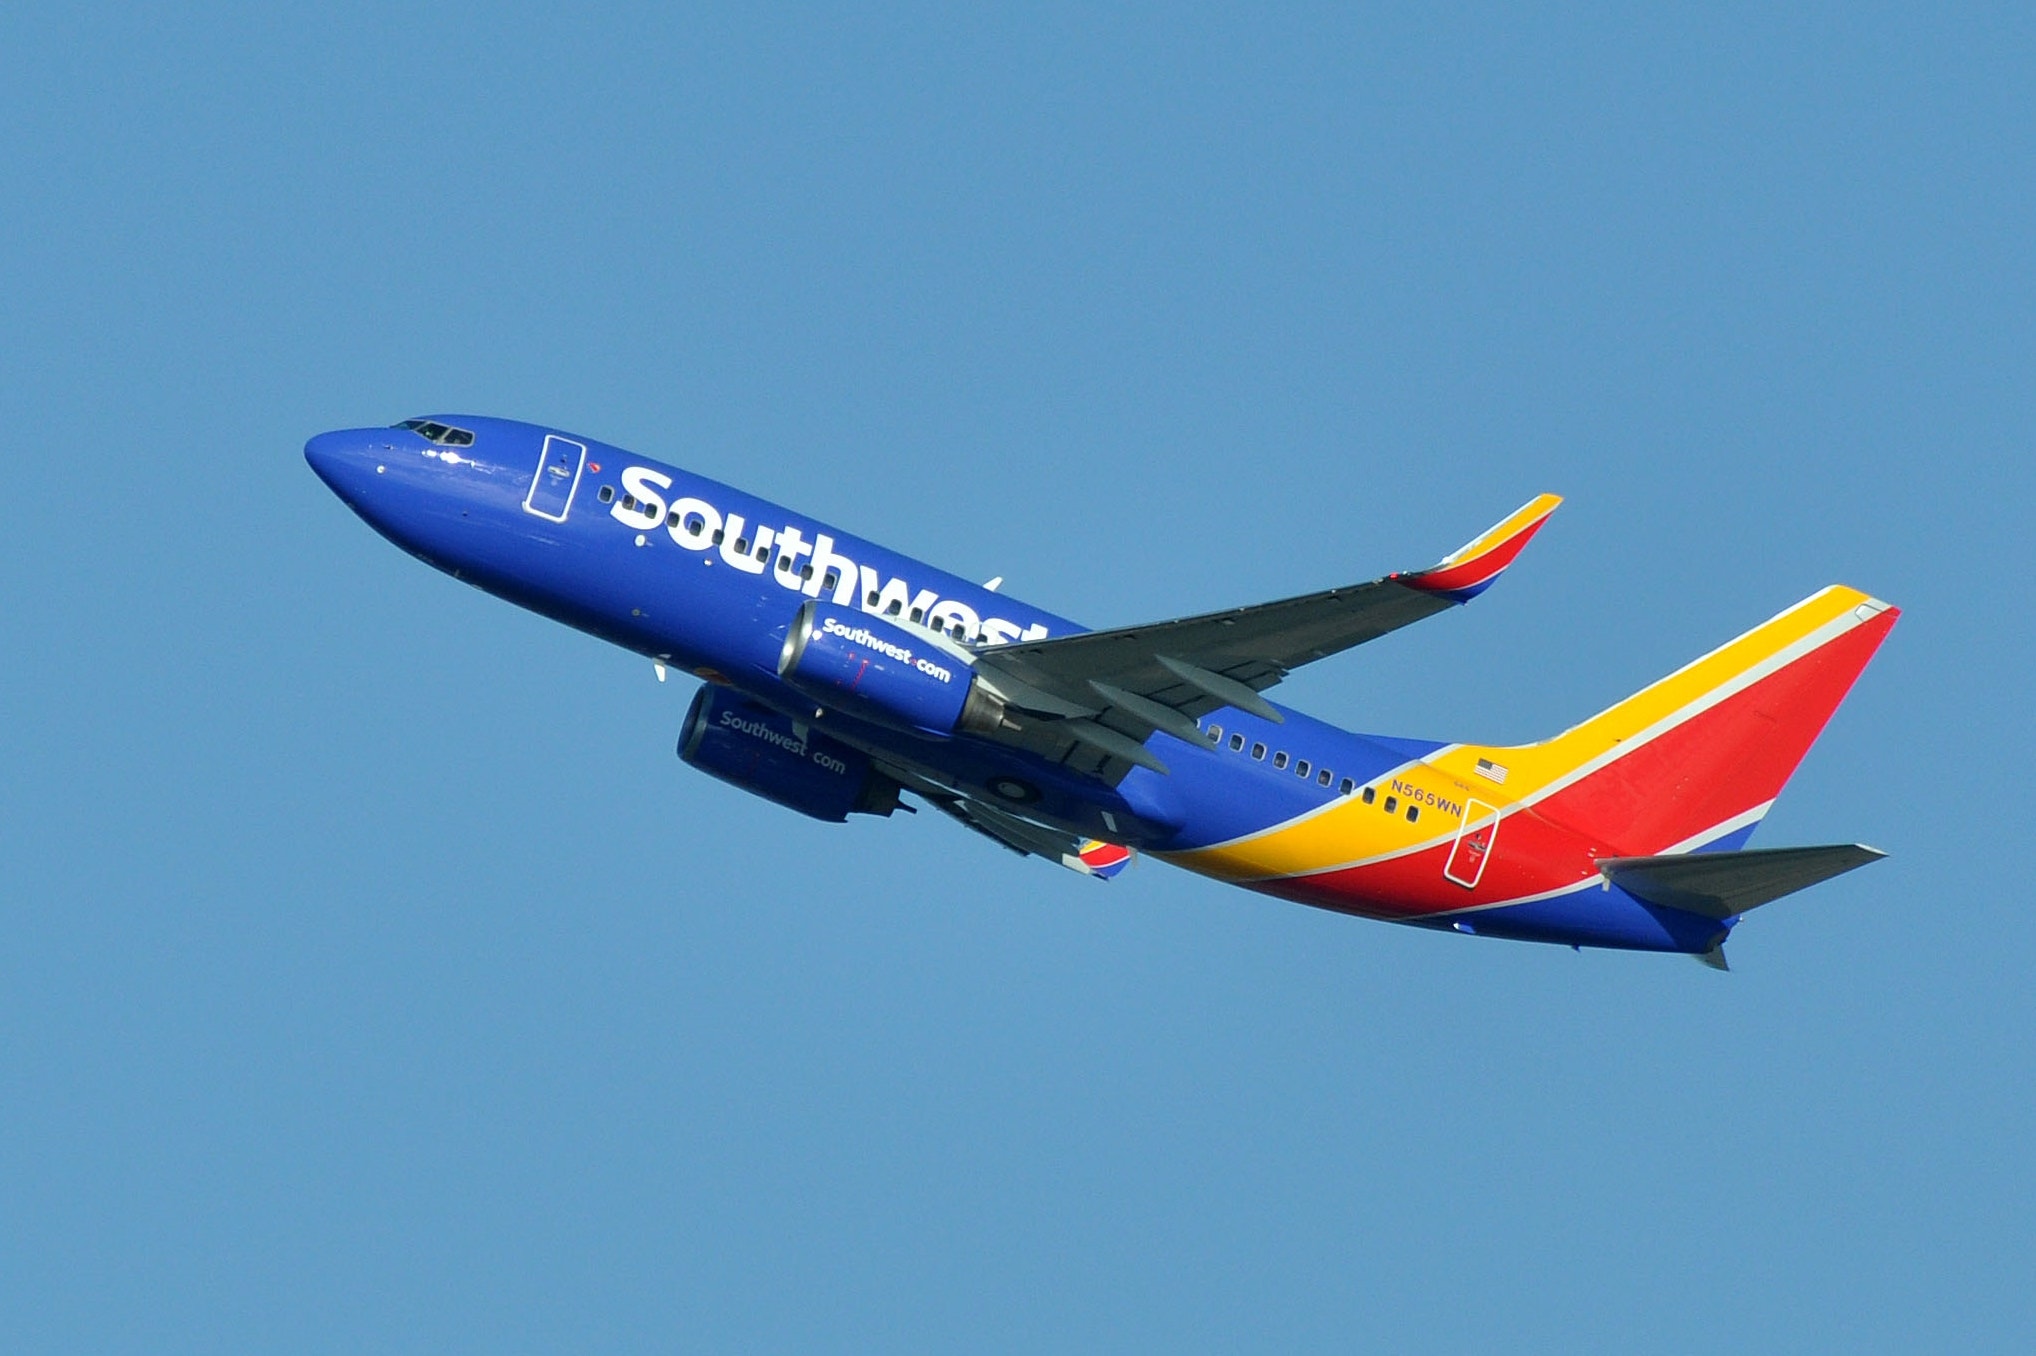 Southwest Airlines Faces Shareholder Activism, Reshuffles Leadership To Strengthen Ops